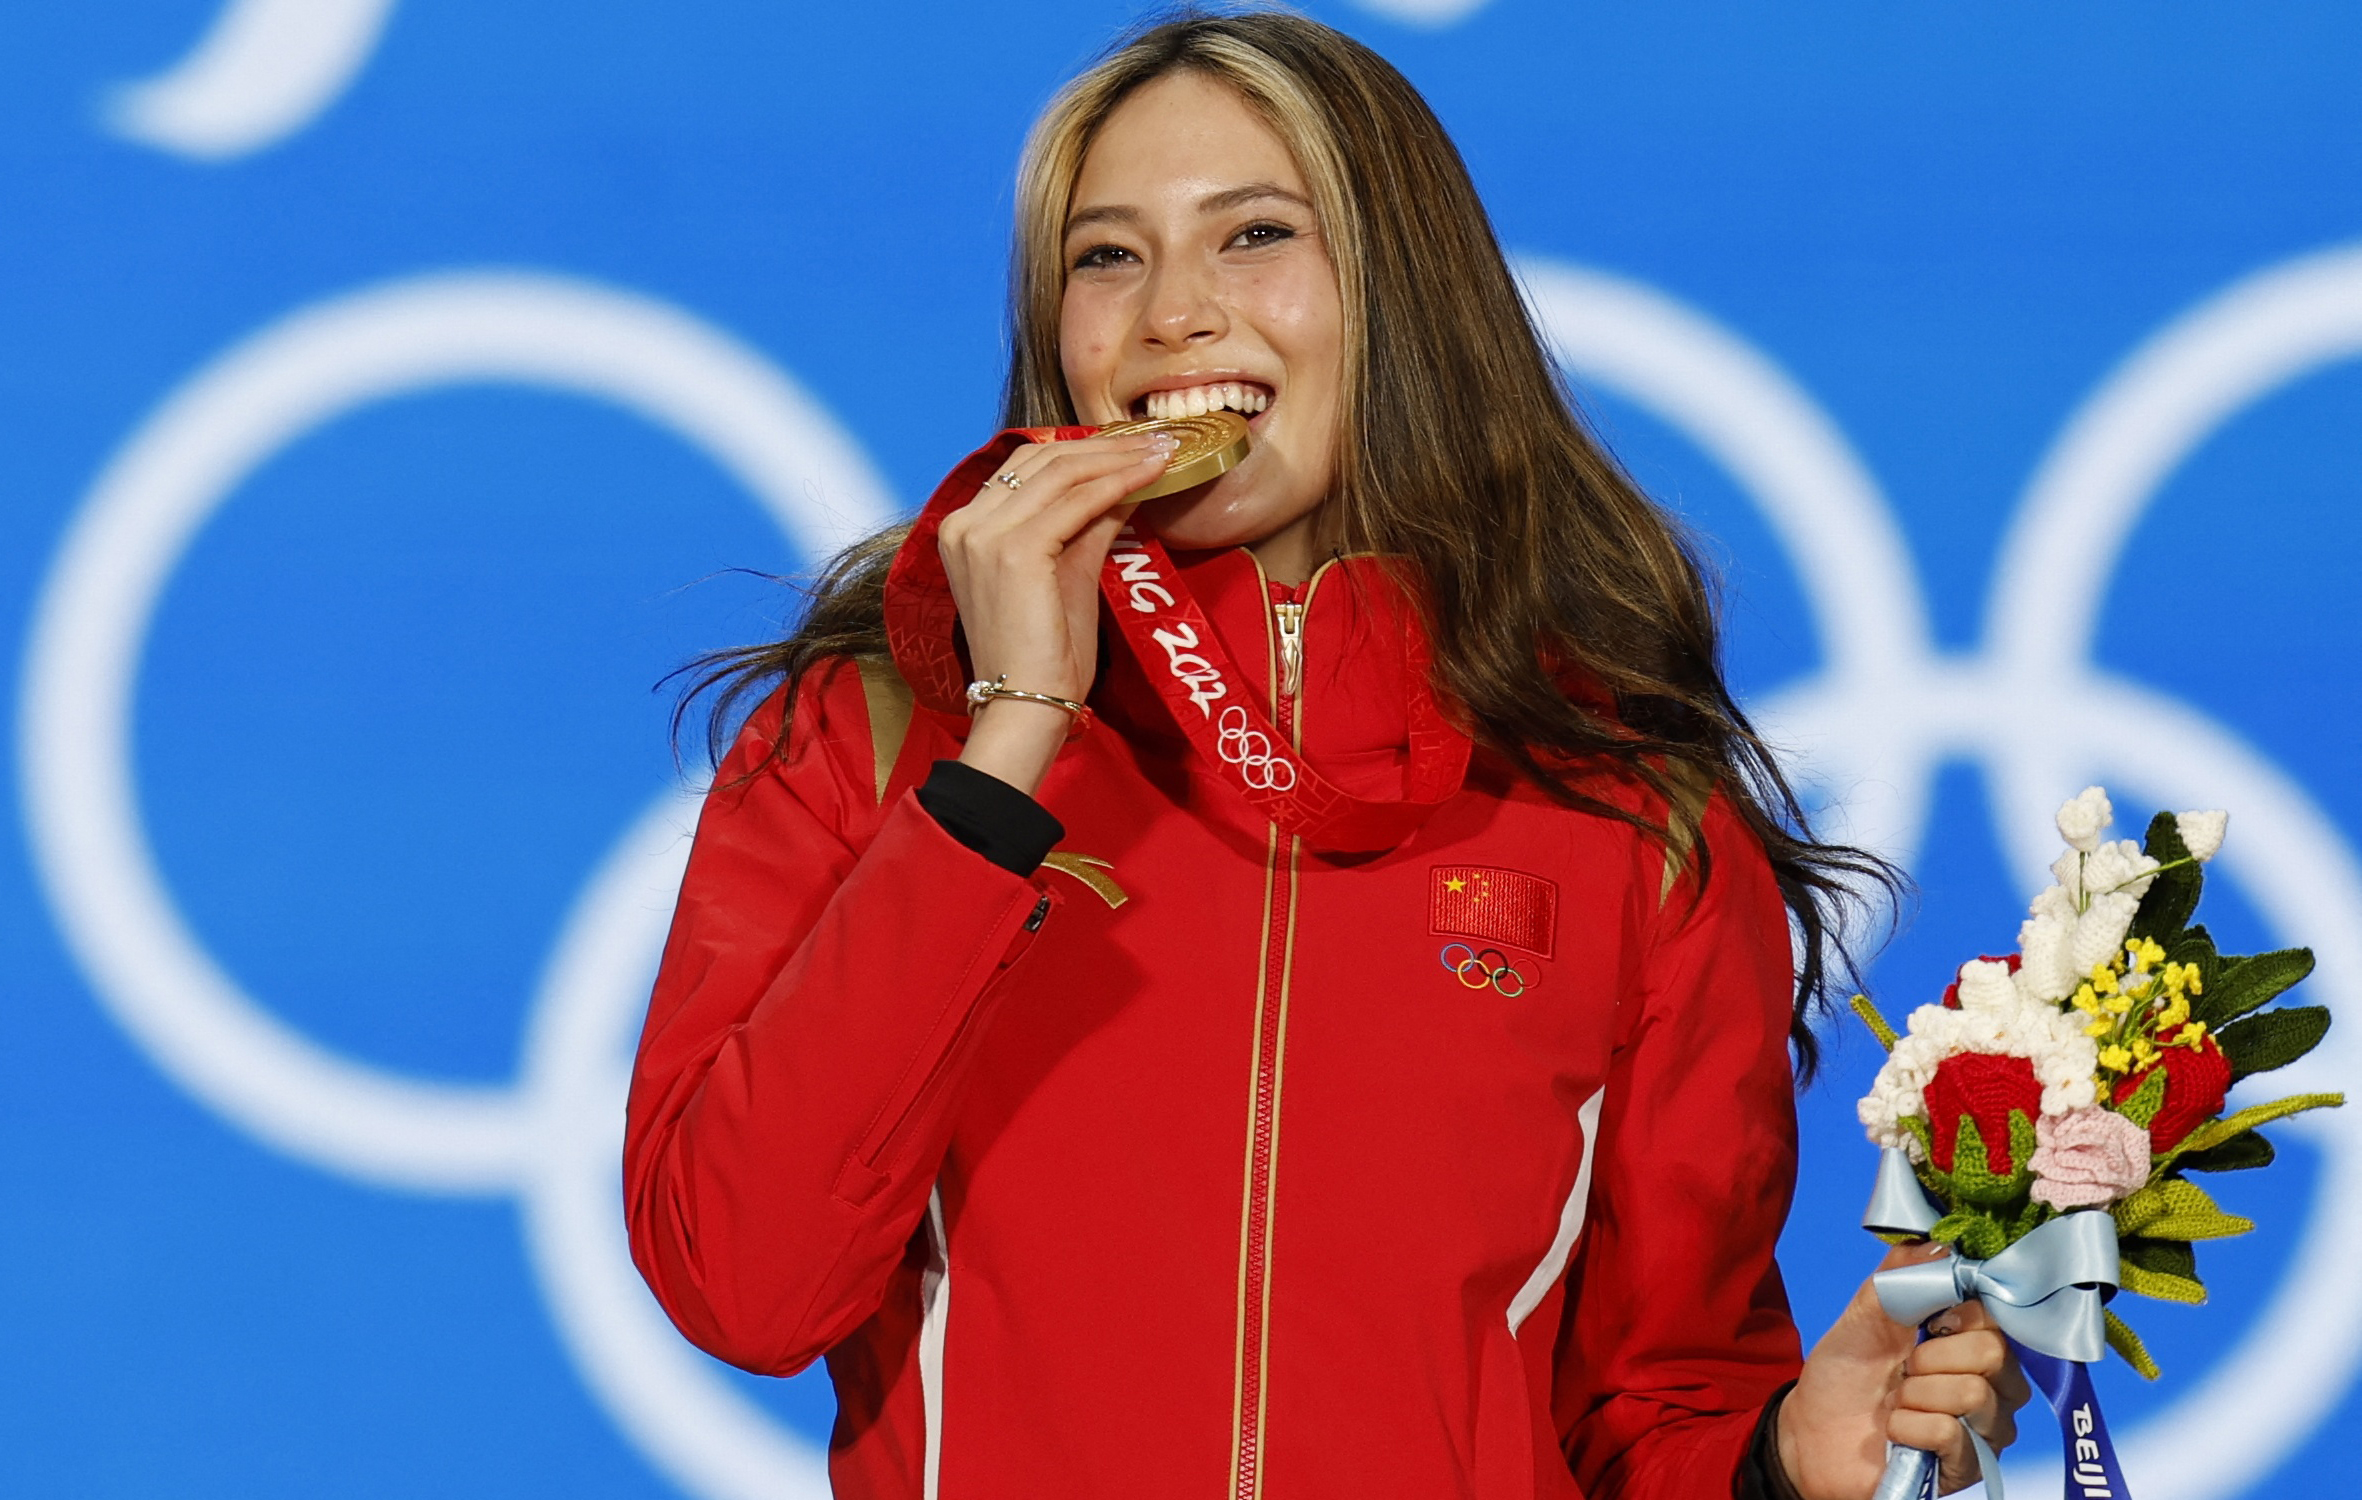 Who is Eileen Gu? The Winter Olympics hero representing China was